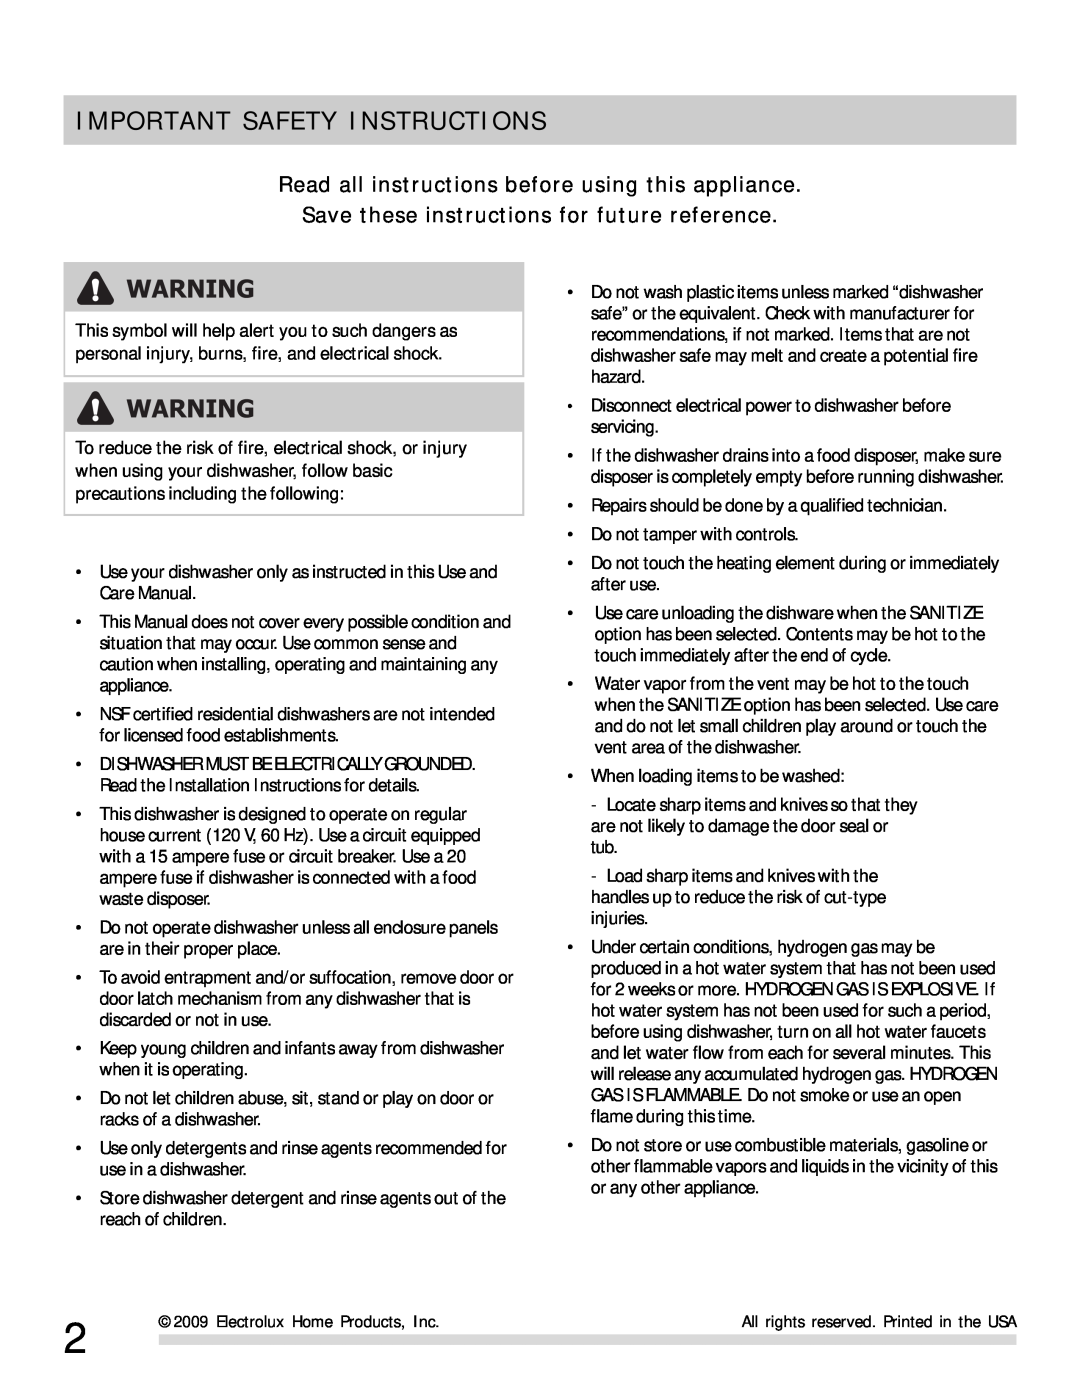 Frigidaire 154768501 manual Important Safety Instructions, Read all instructions before using this appliance 